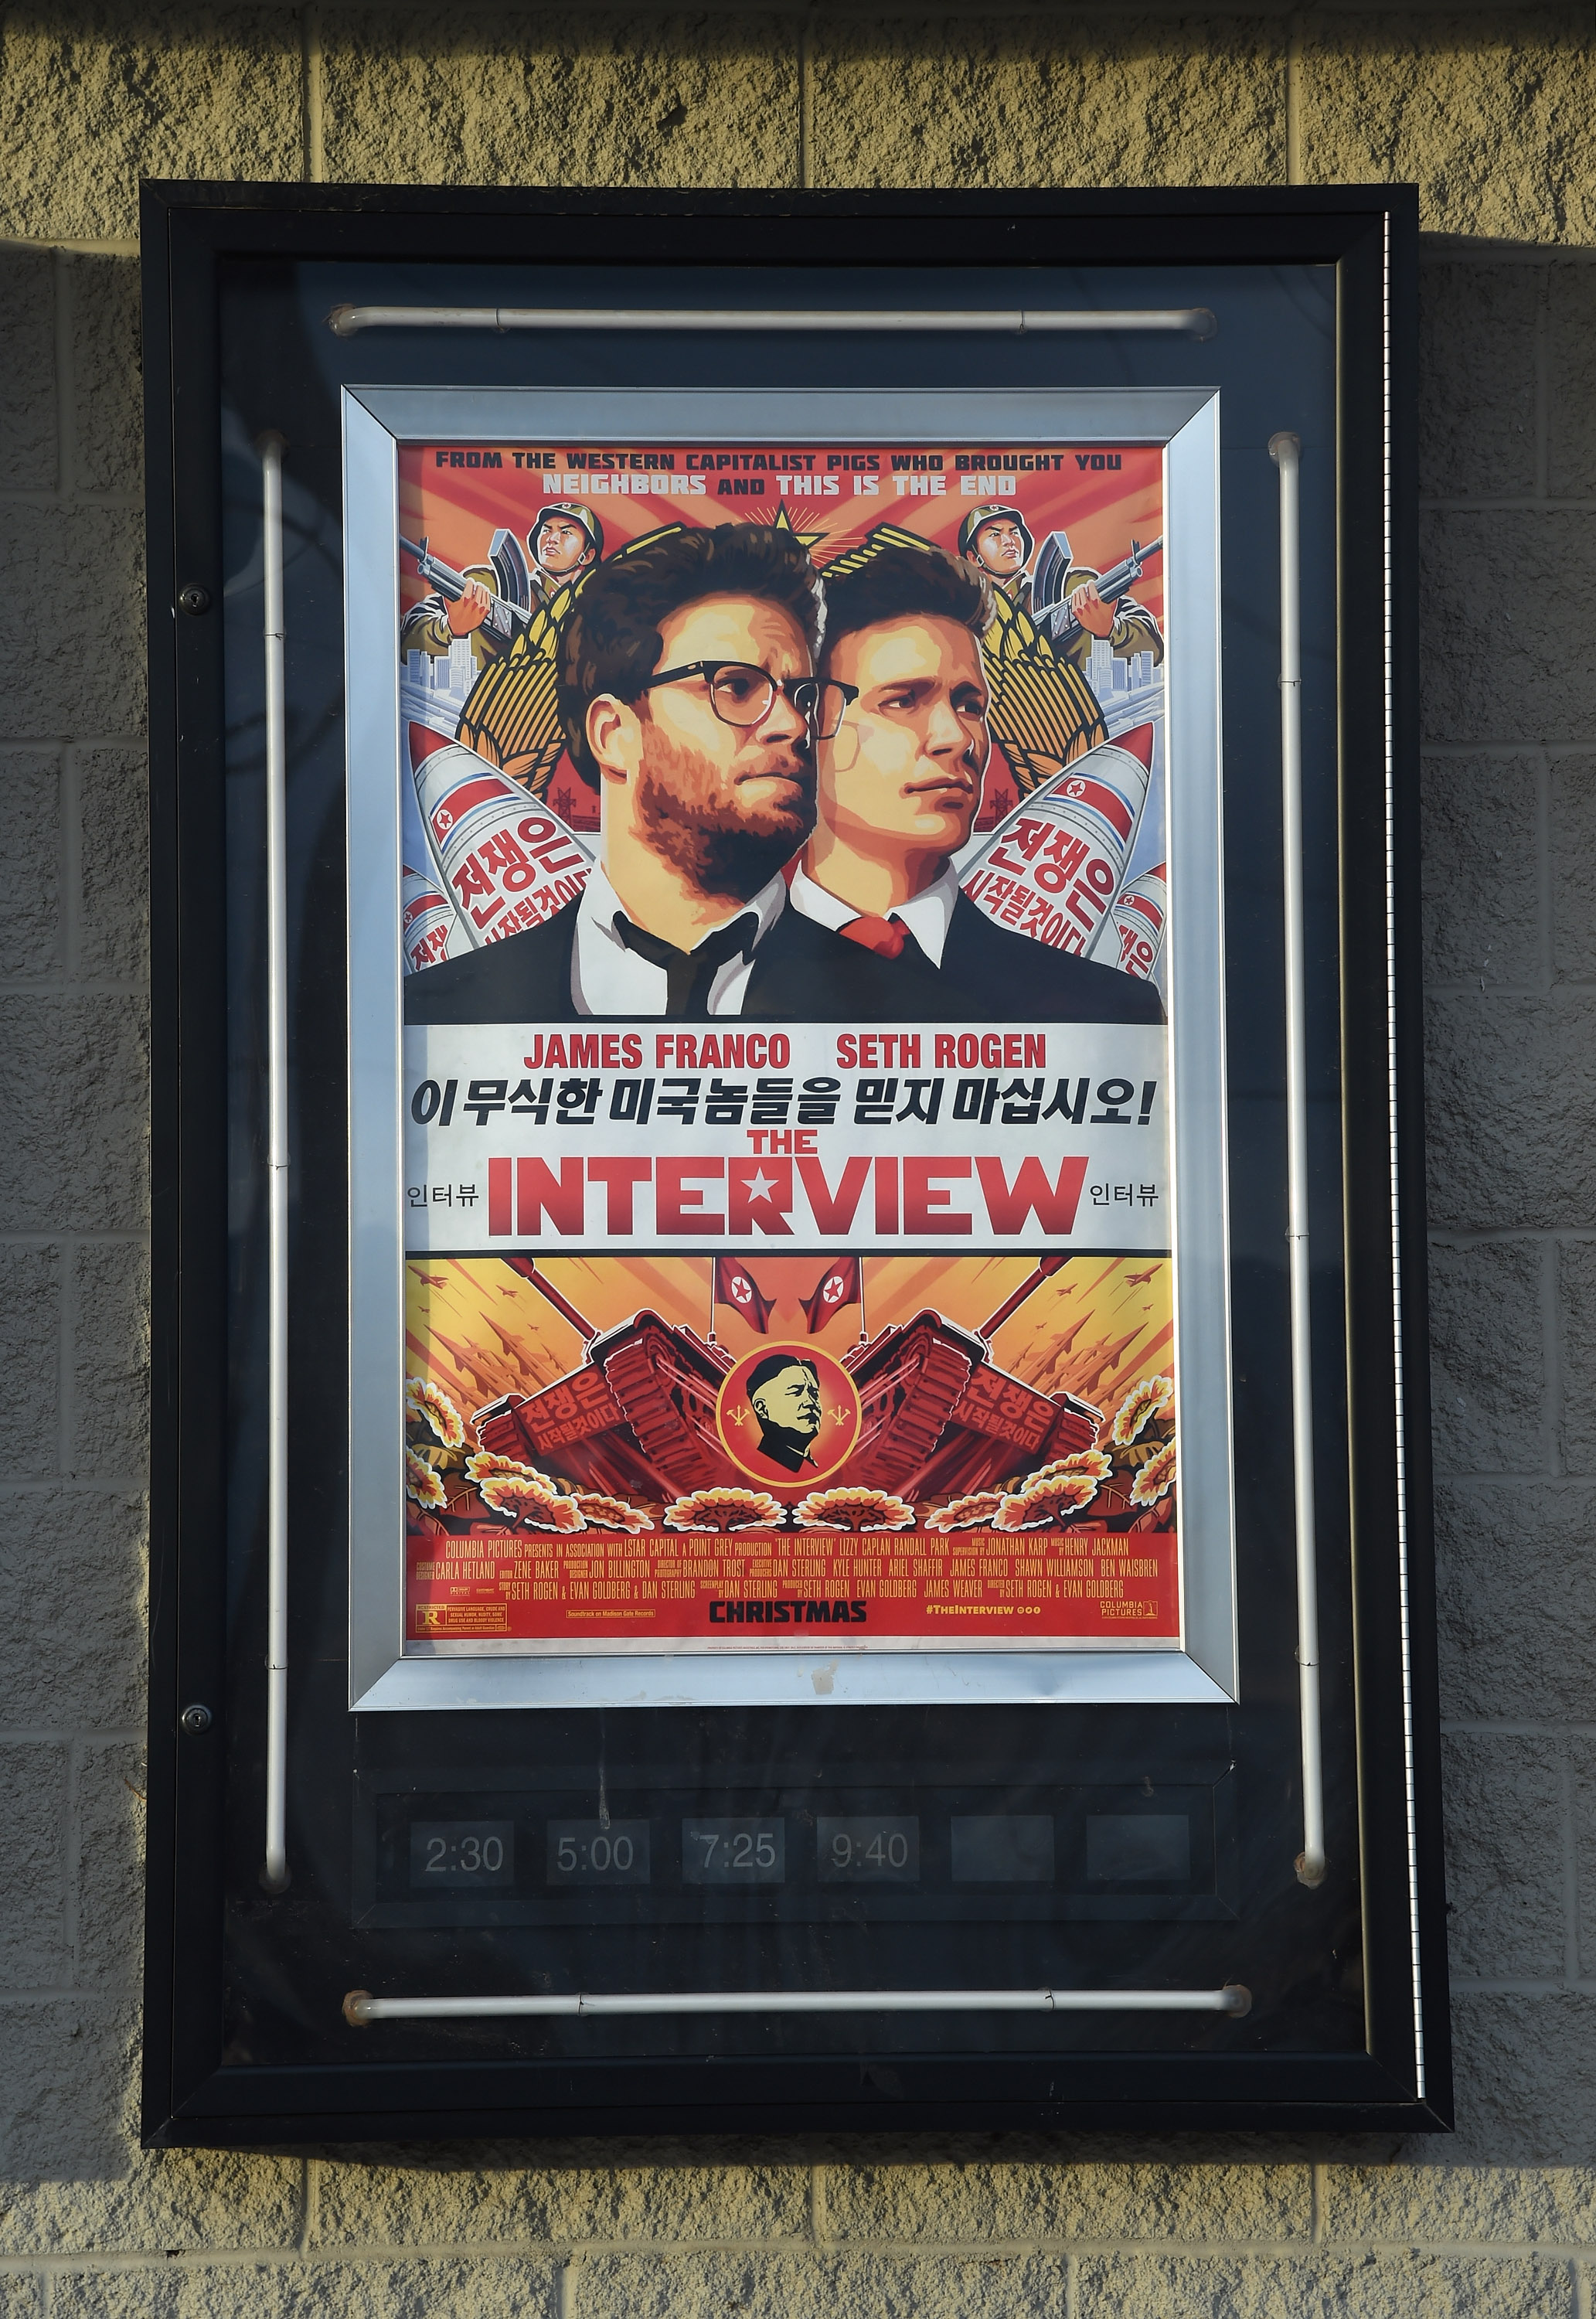 Sony The Interview $!5 Million Online